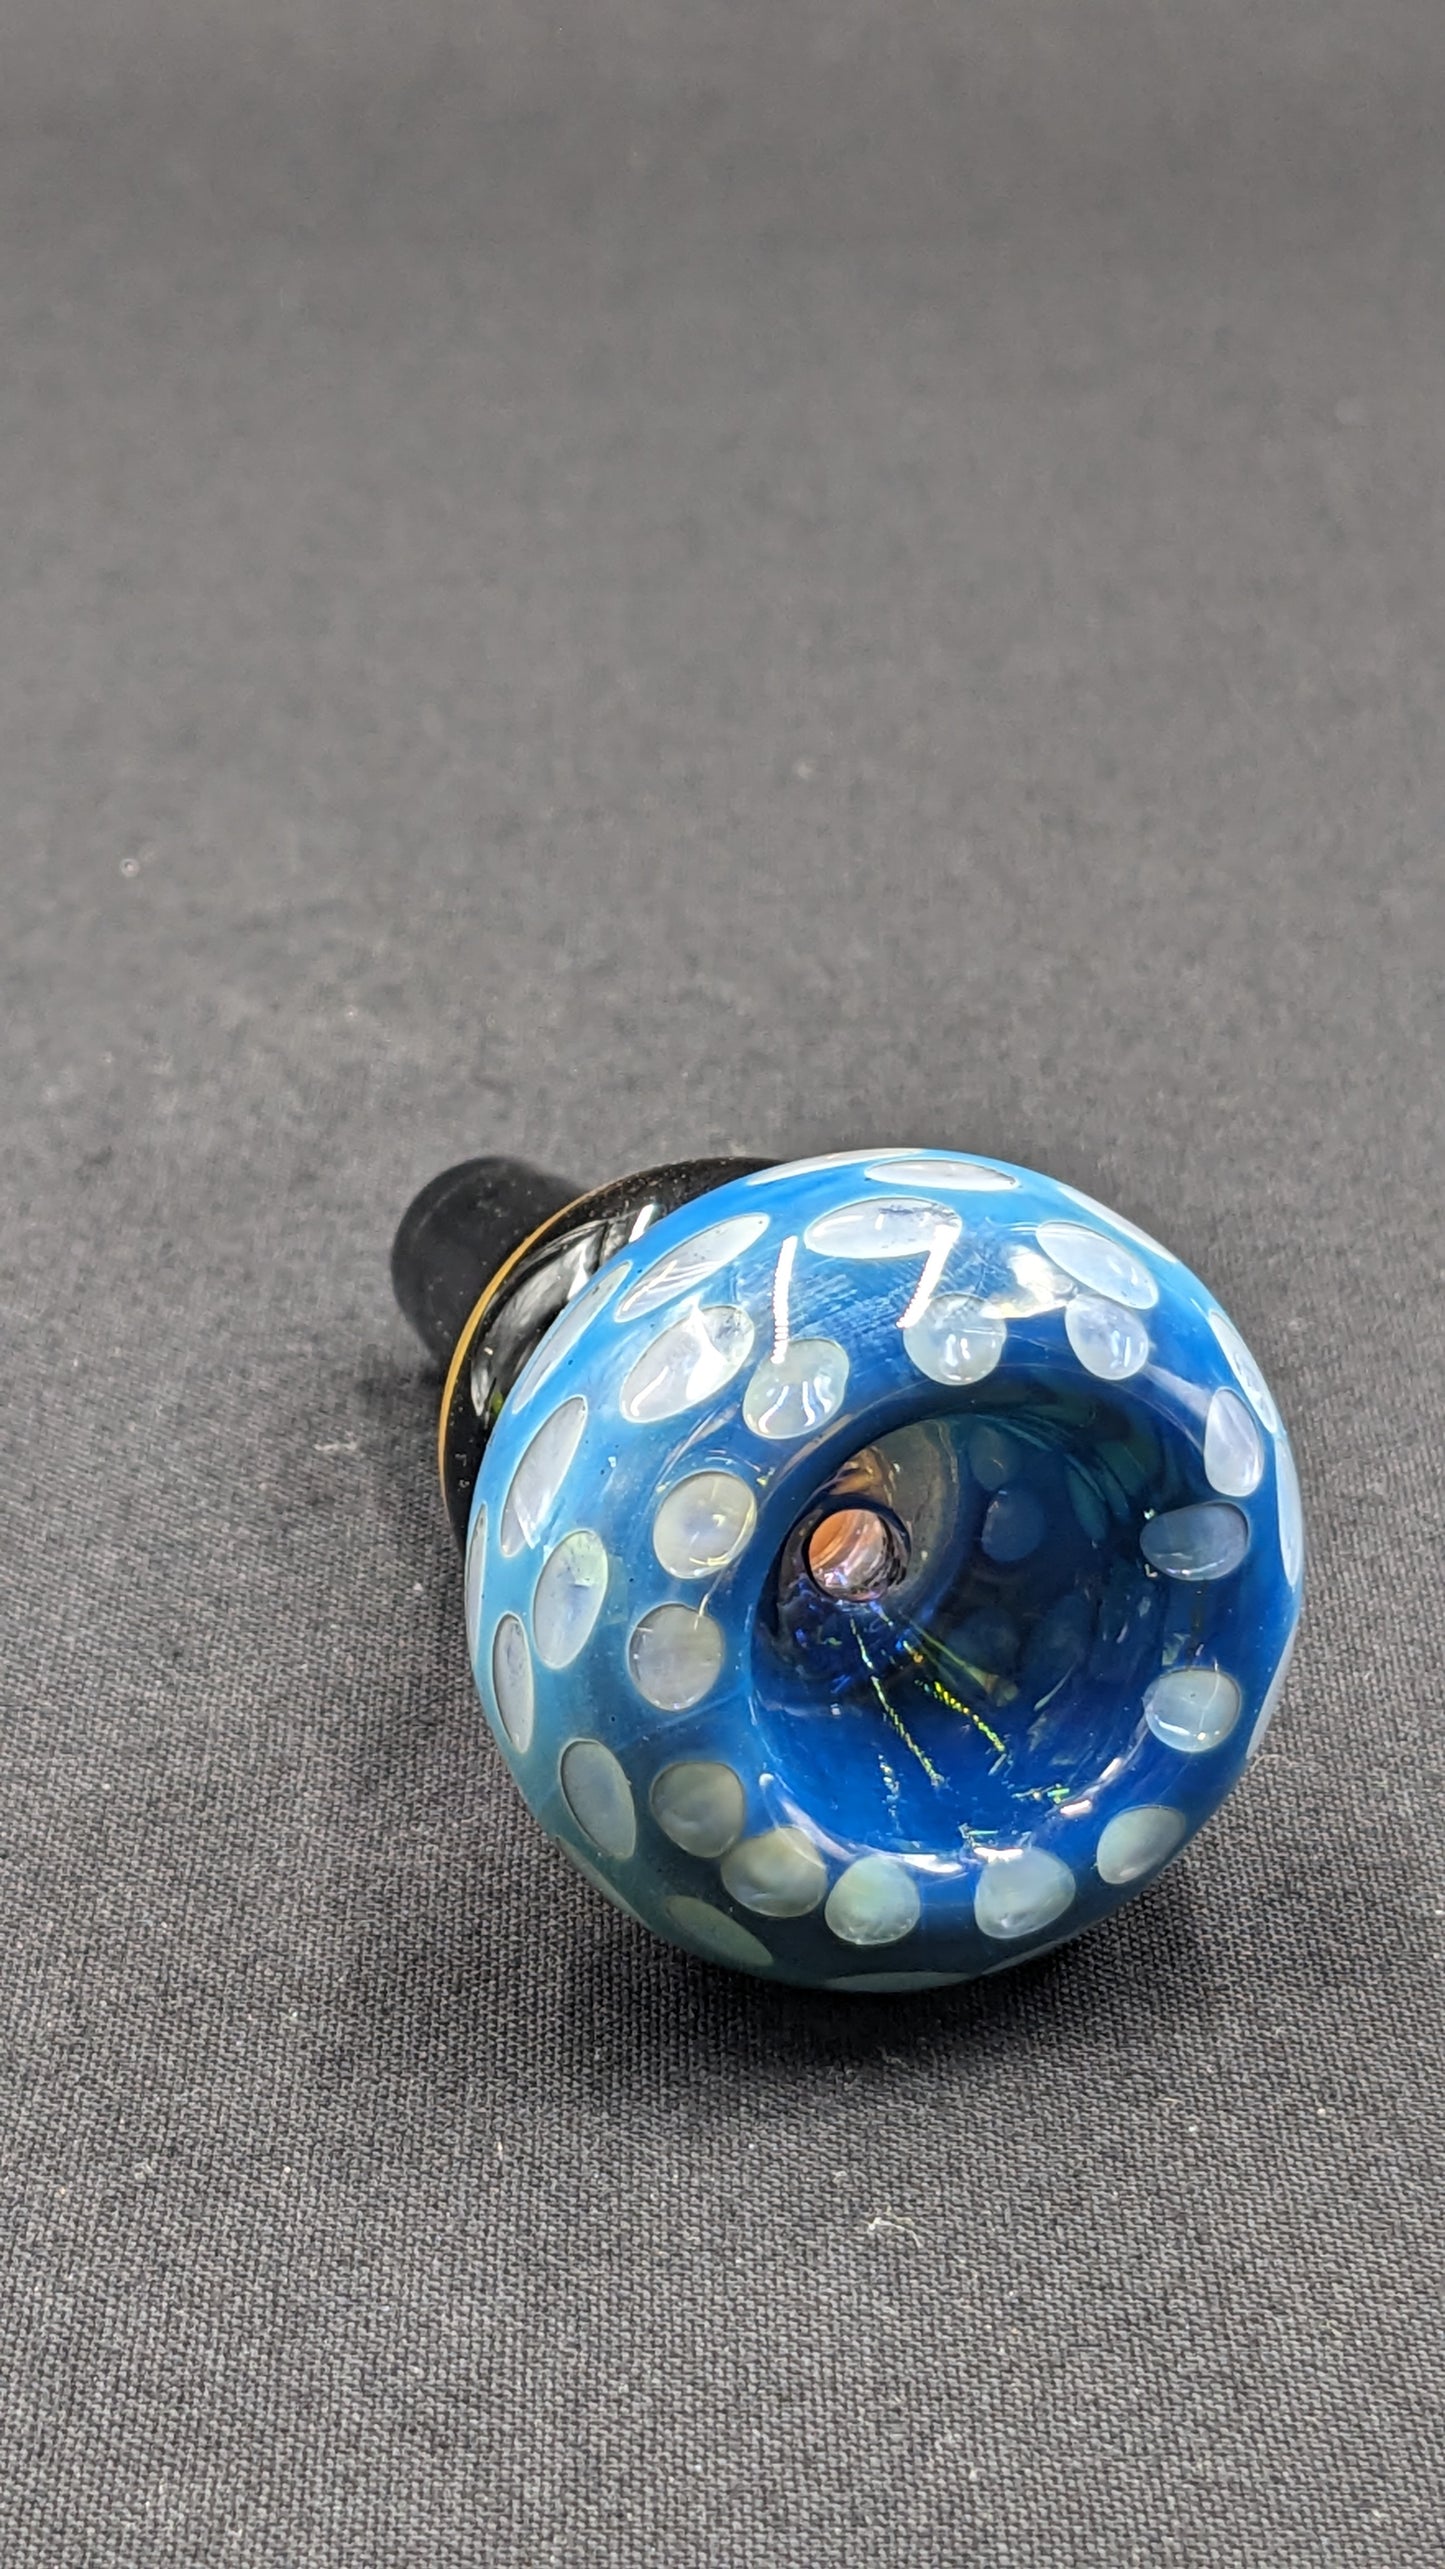 14mm Male Slide Bowl Glass for Water Pipes - BW07 Gold Fummed Sp-Blue